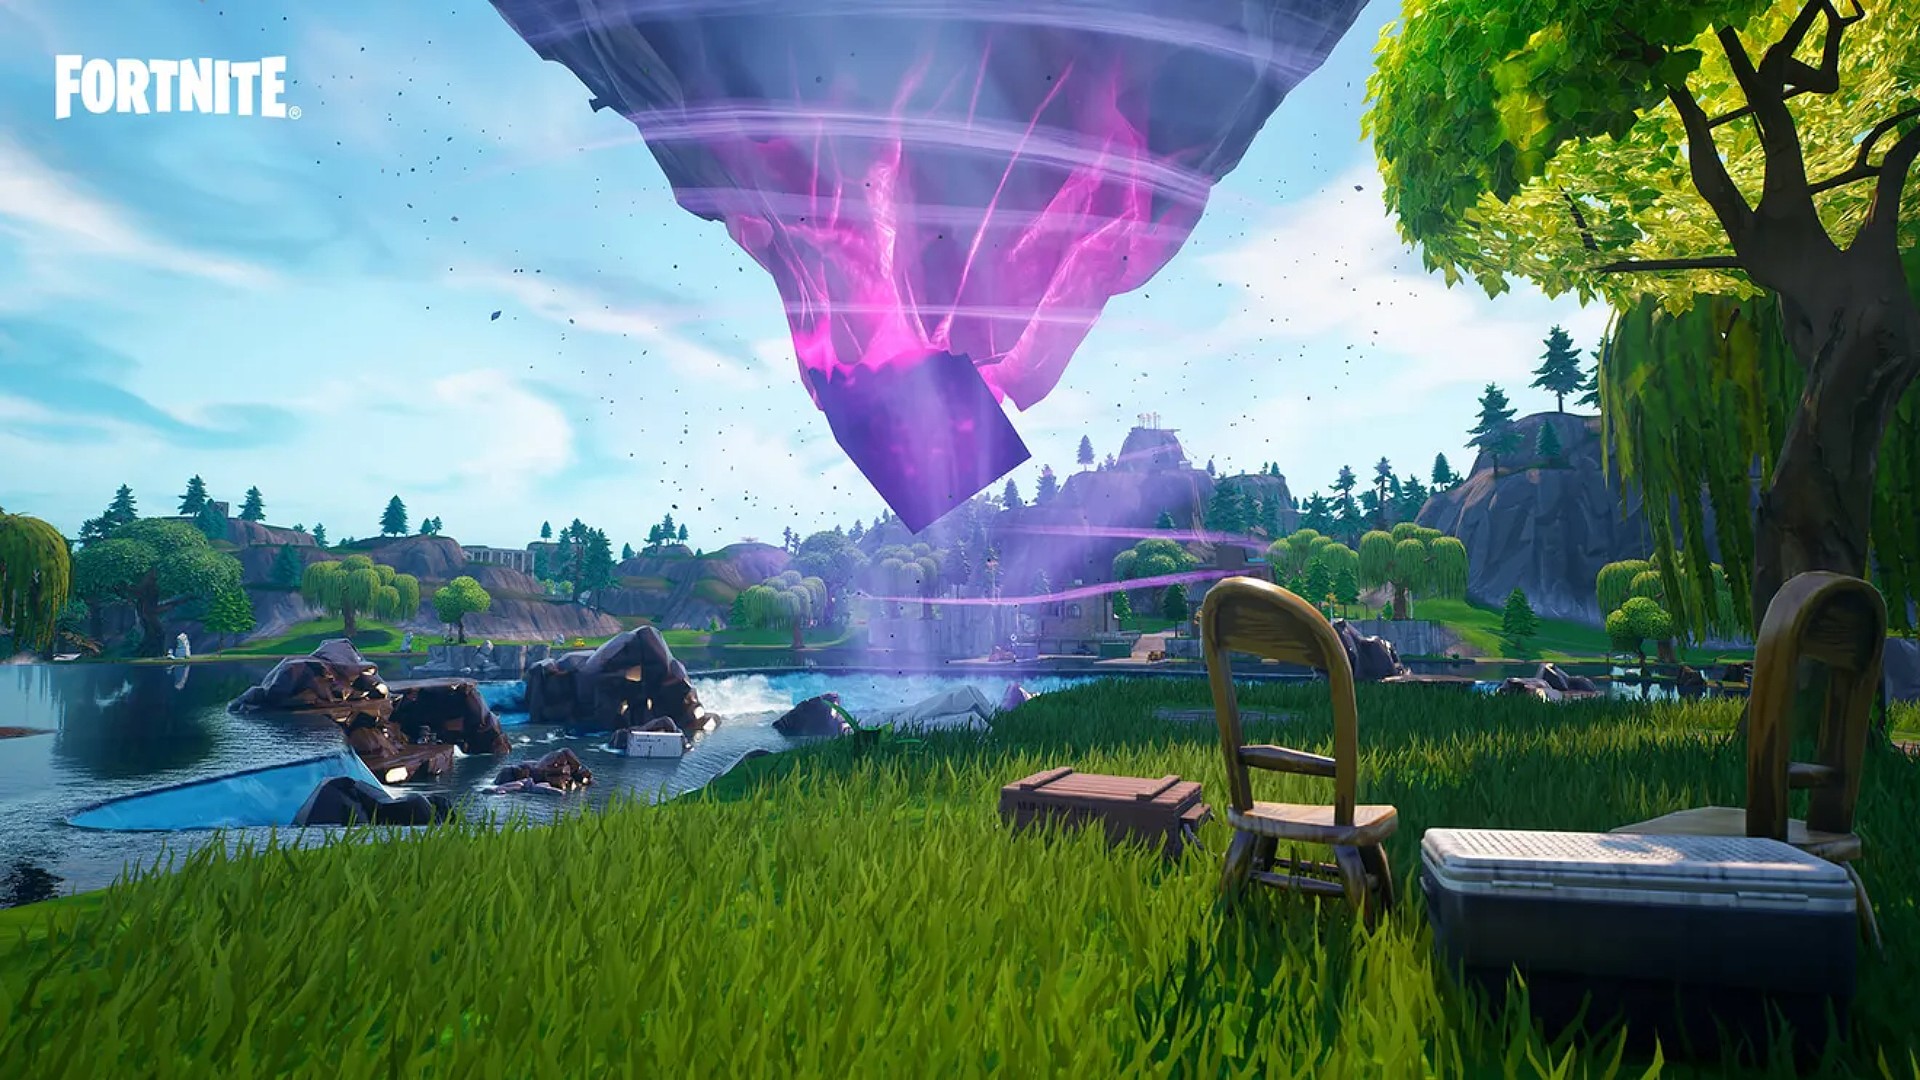 Kevin the Cube above Loot Lake in Fortnite